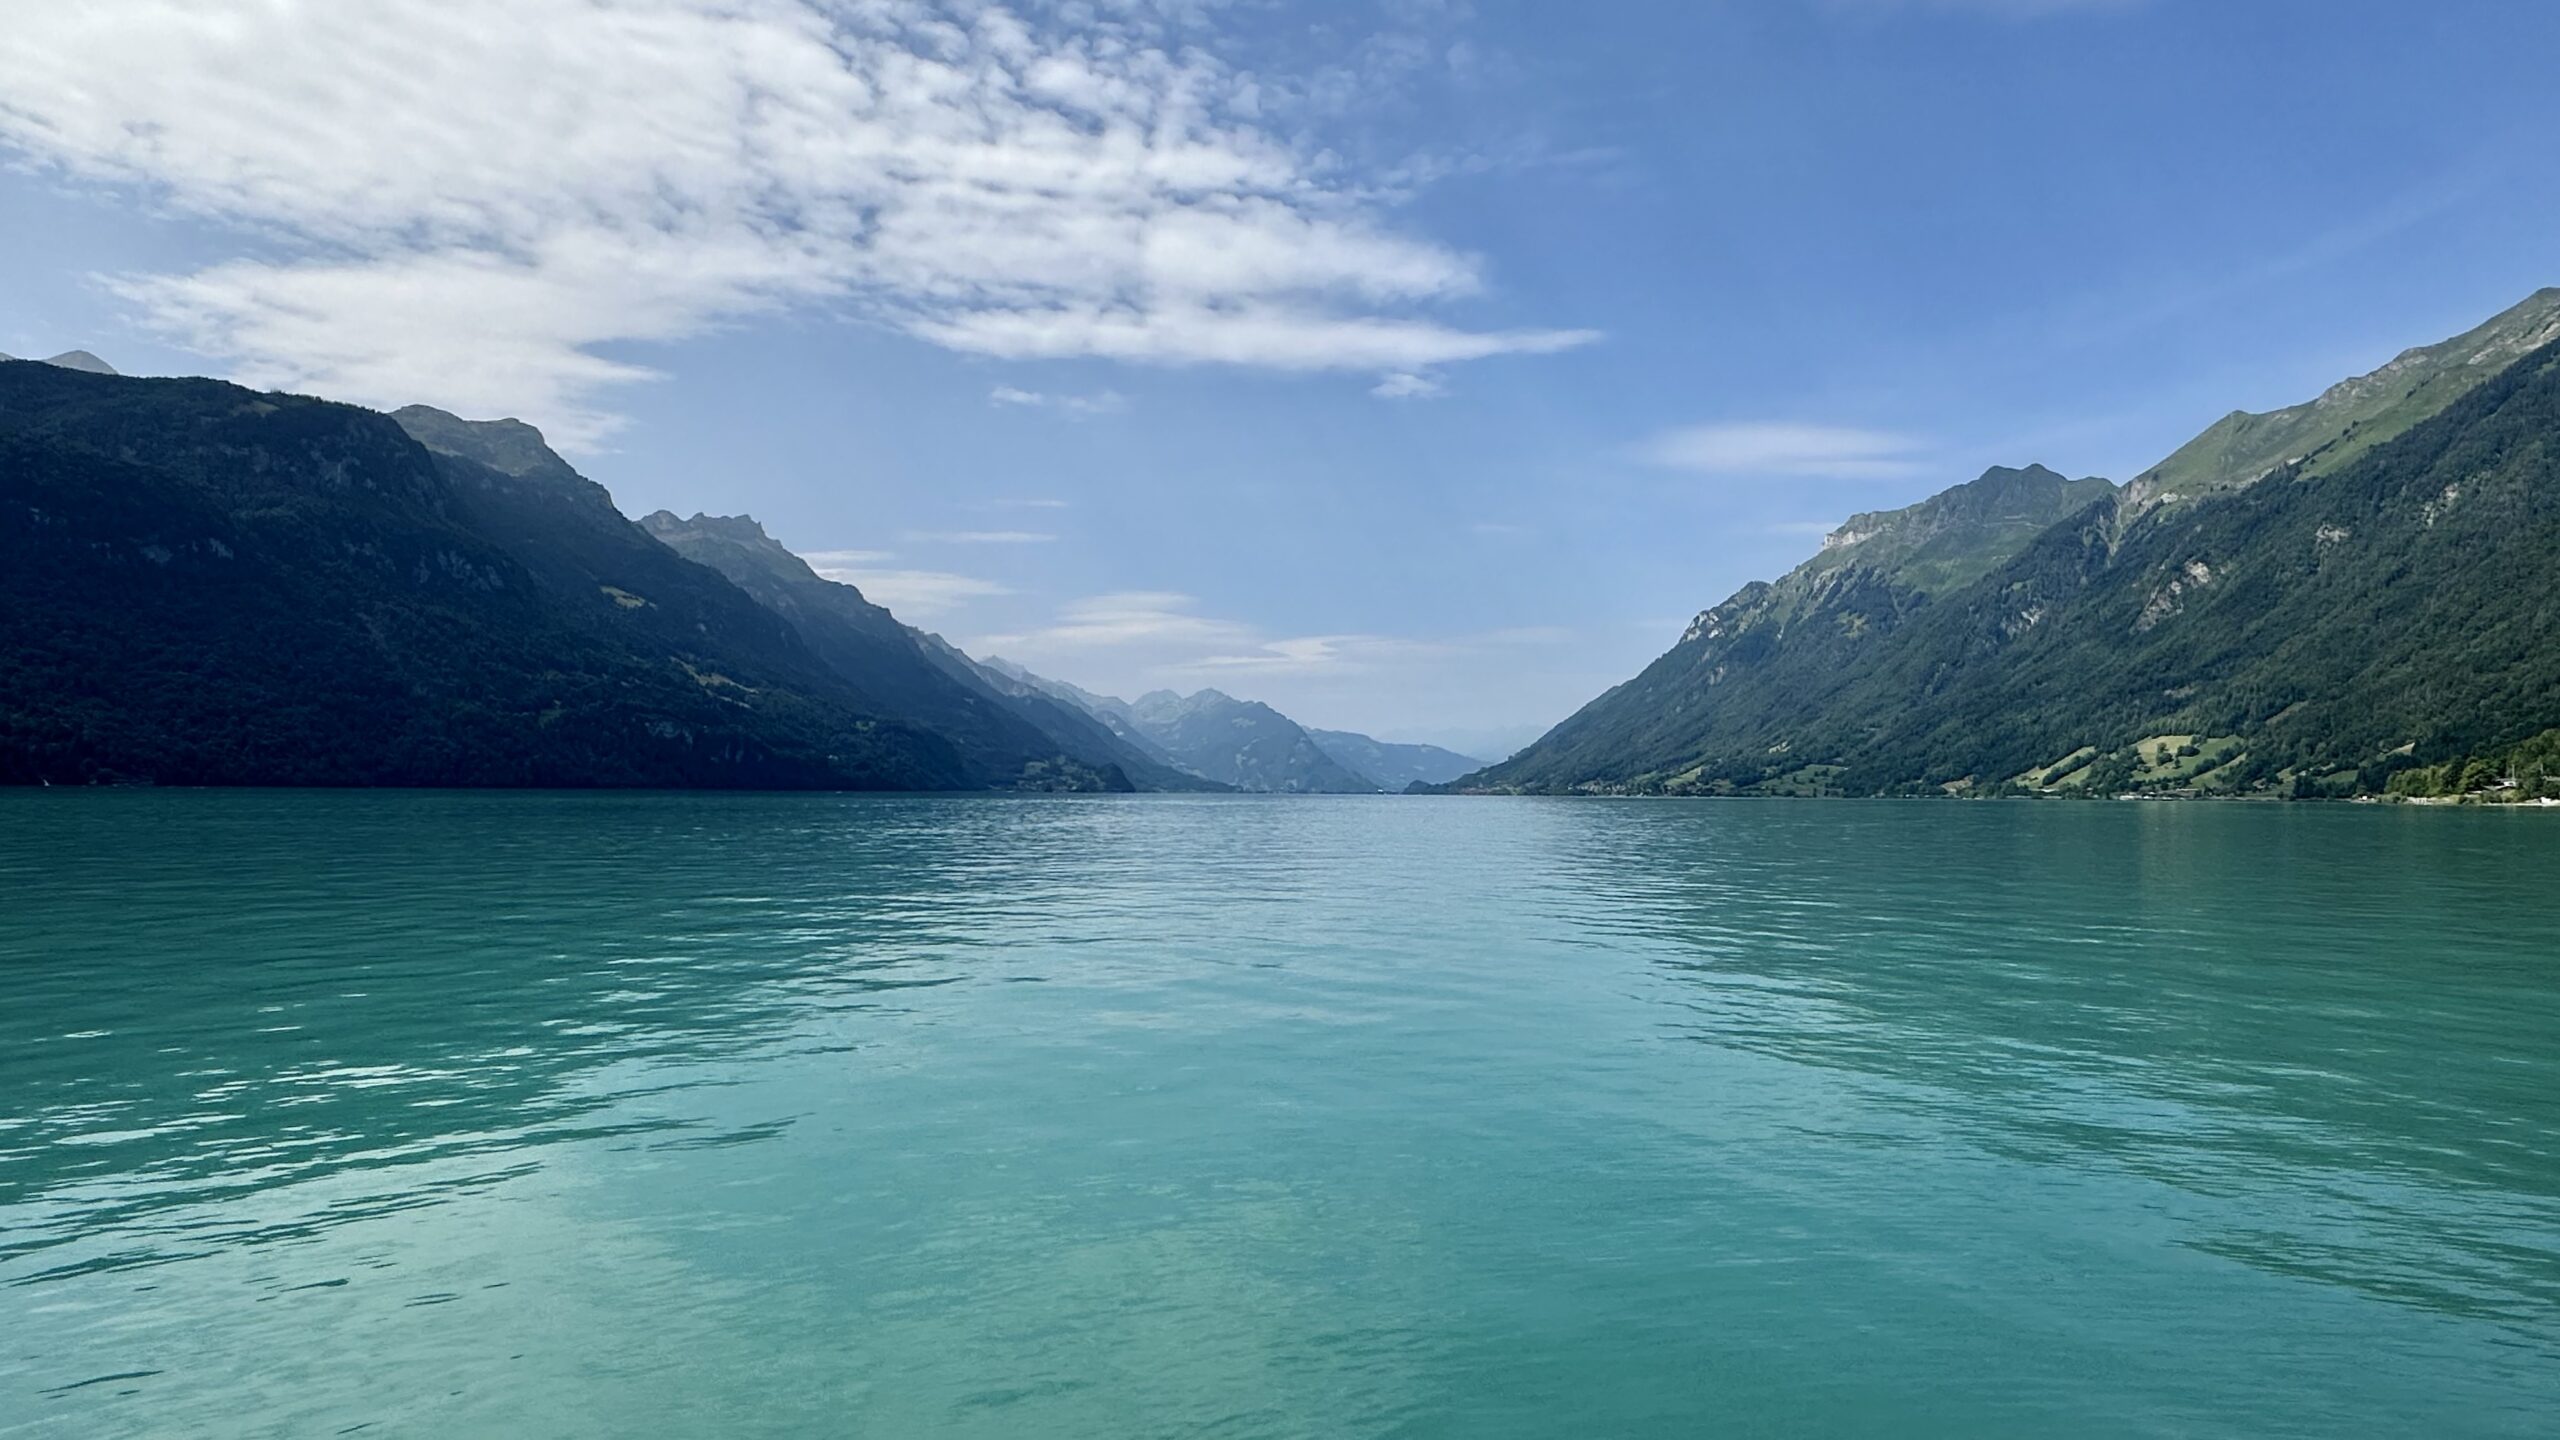 View of Lake Brienz, Switzerland. The water is greenish blue, forested mountains are in the distance and a blue sky with white clouds overhead.